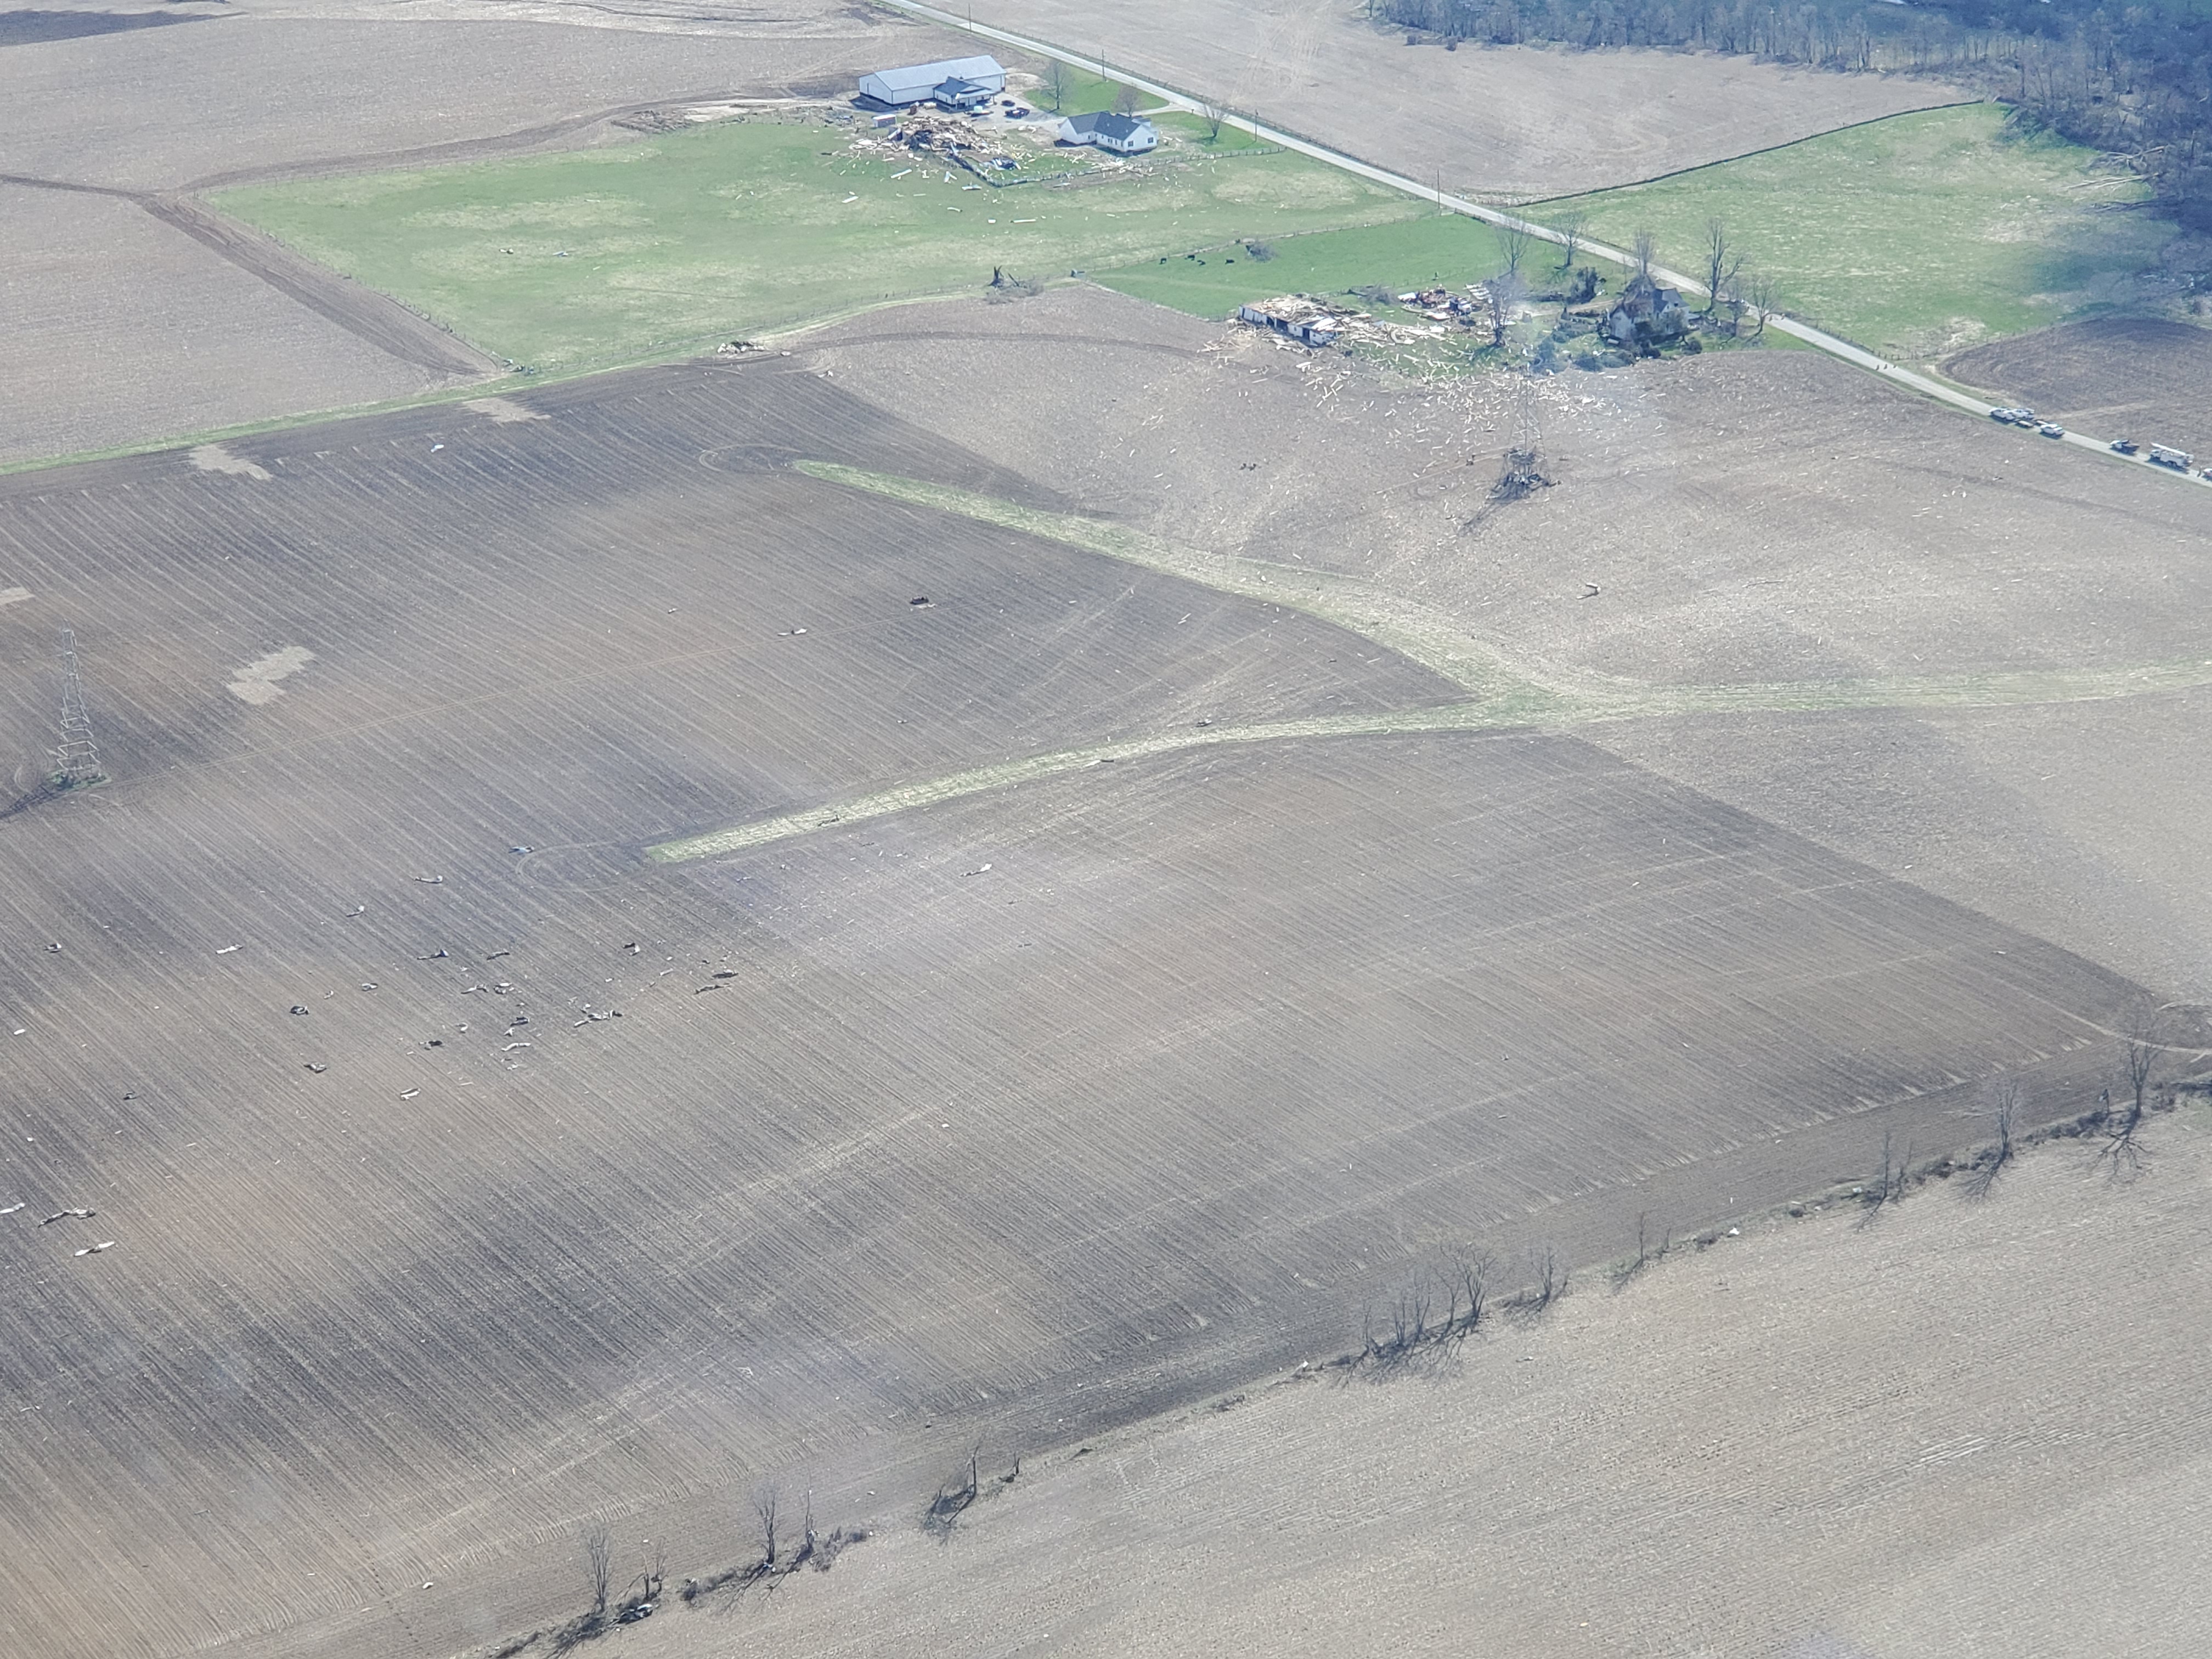 flyover photos courtesy of WEWS Brian Shaw Shelby, OH April 14, 2019